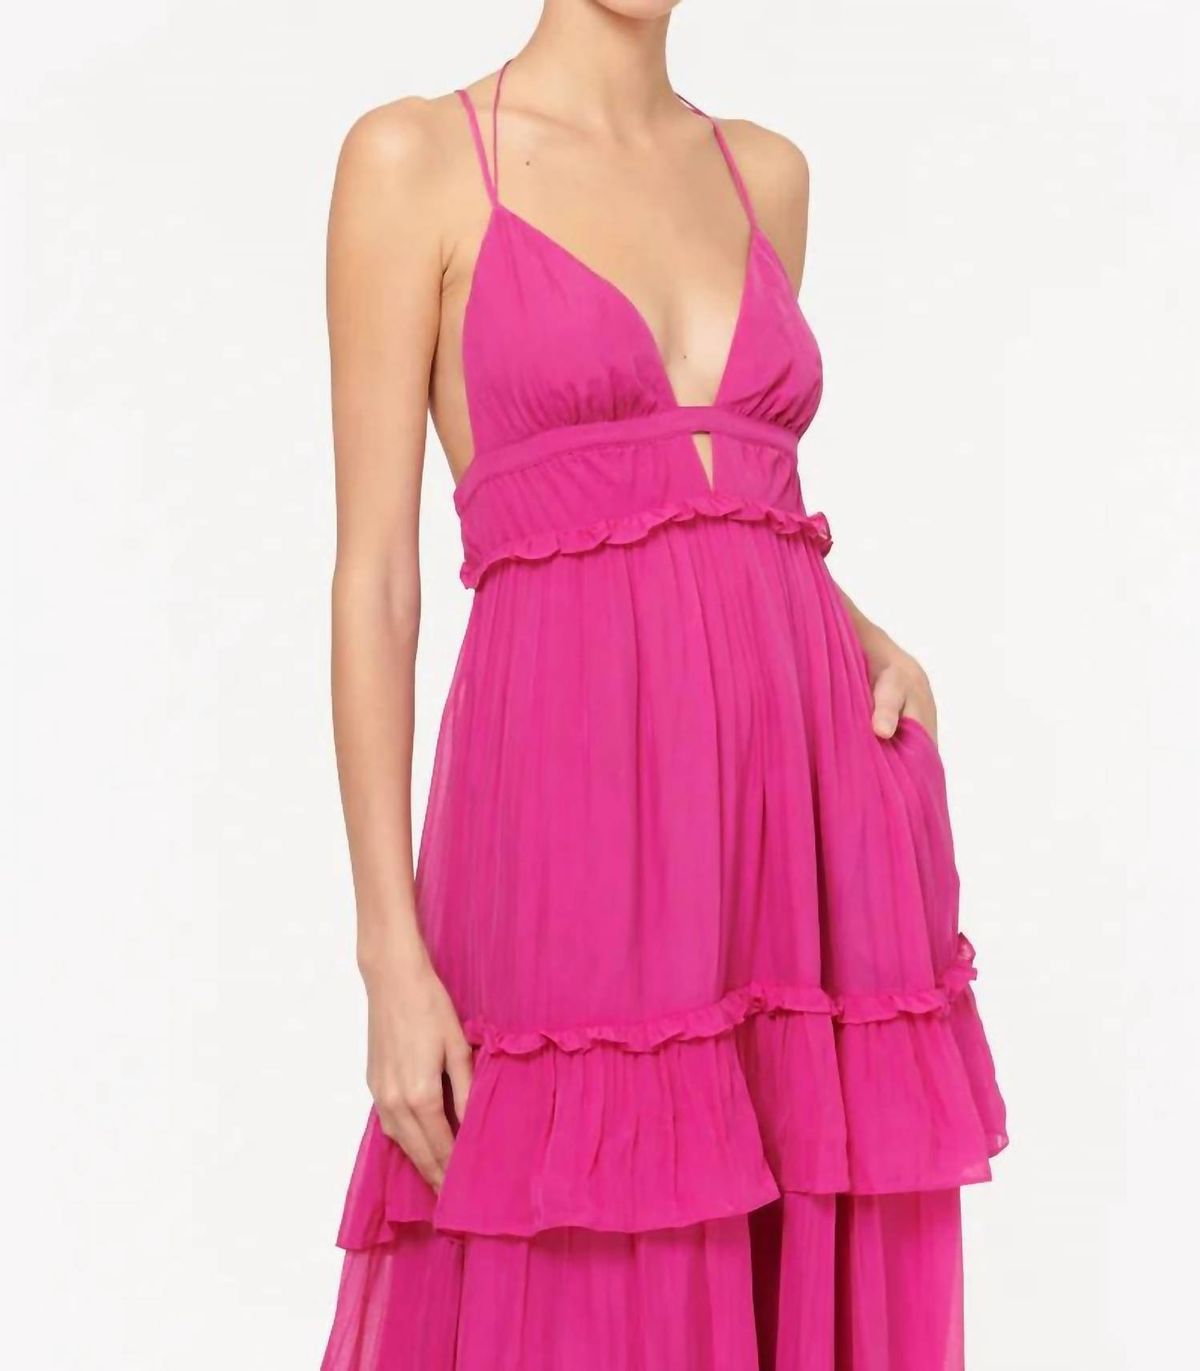 Style 1-3268079283-5 Cami NYC Size 0 Halter Satin Pink A-line Dress on Queenly